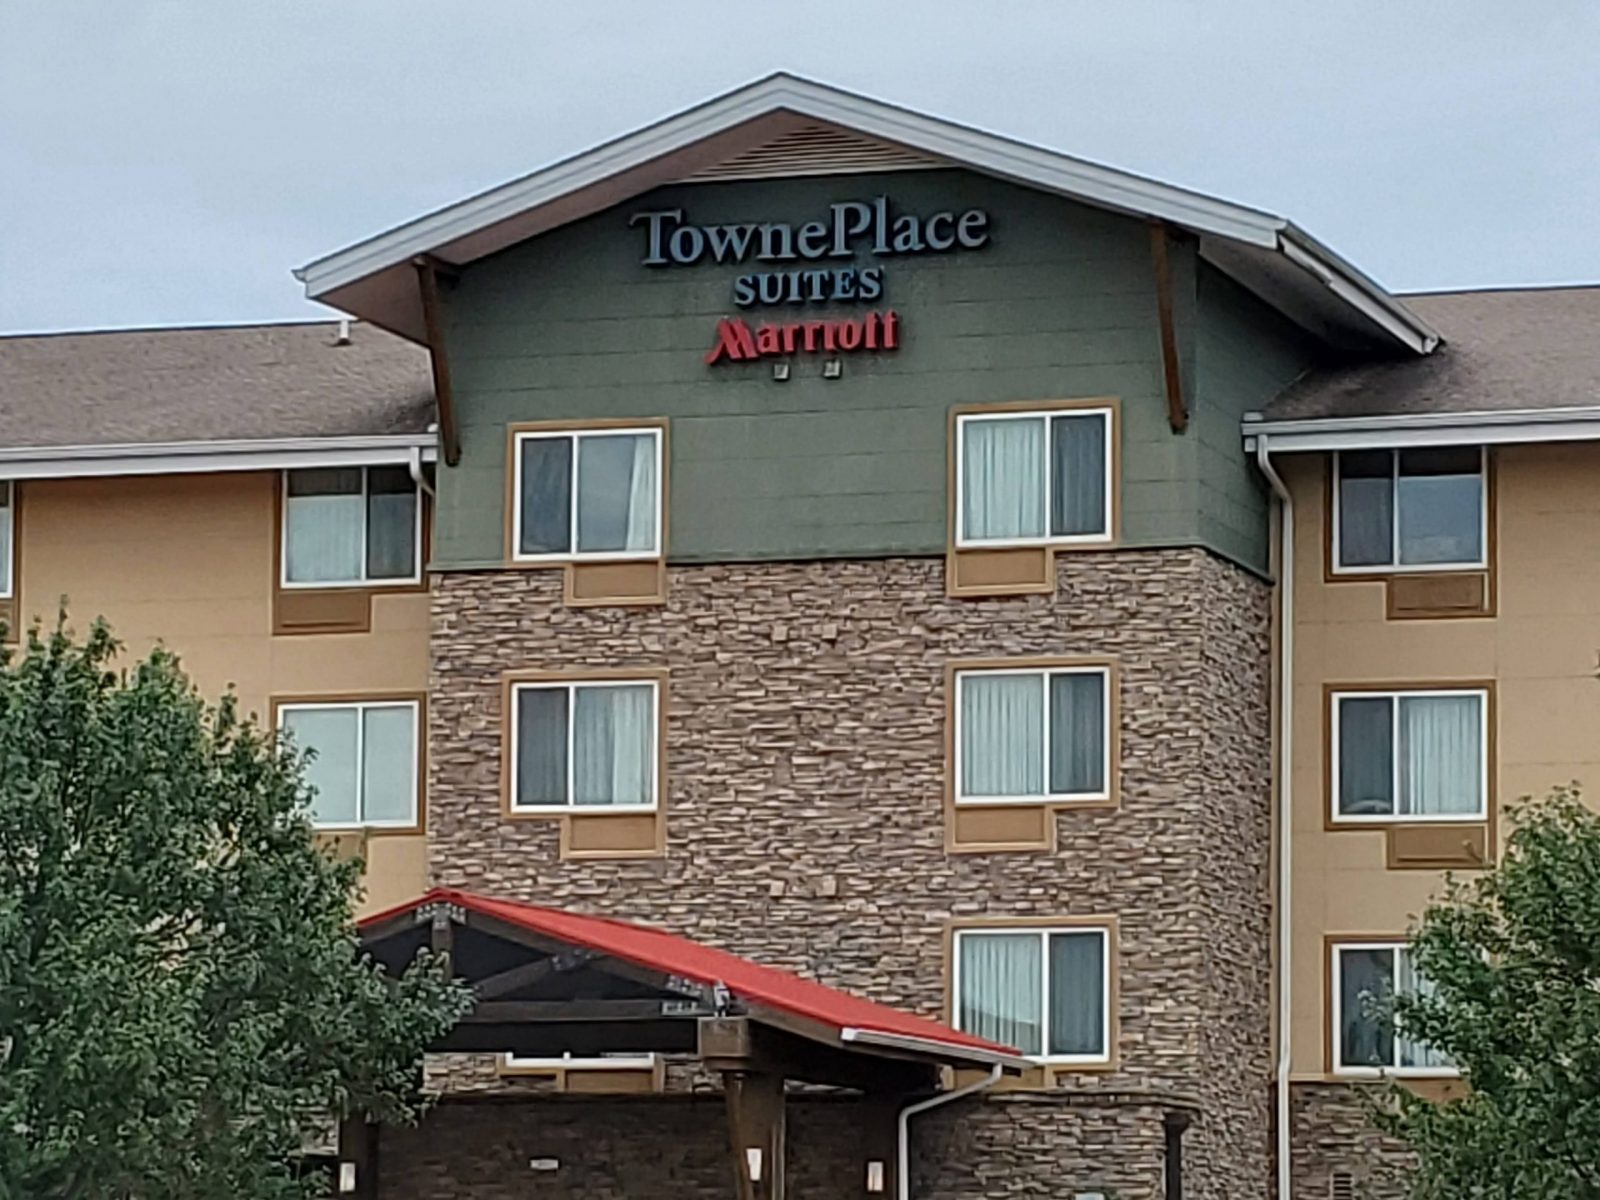 Hotel name sign